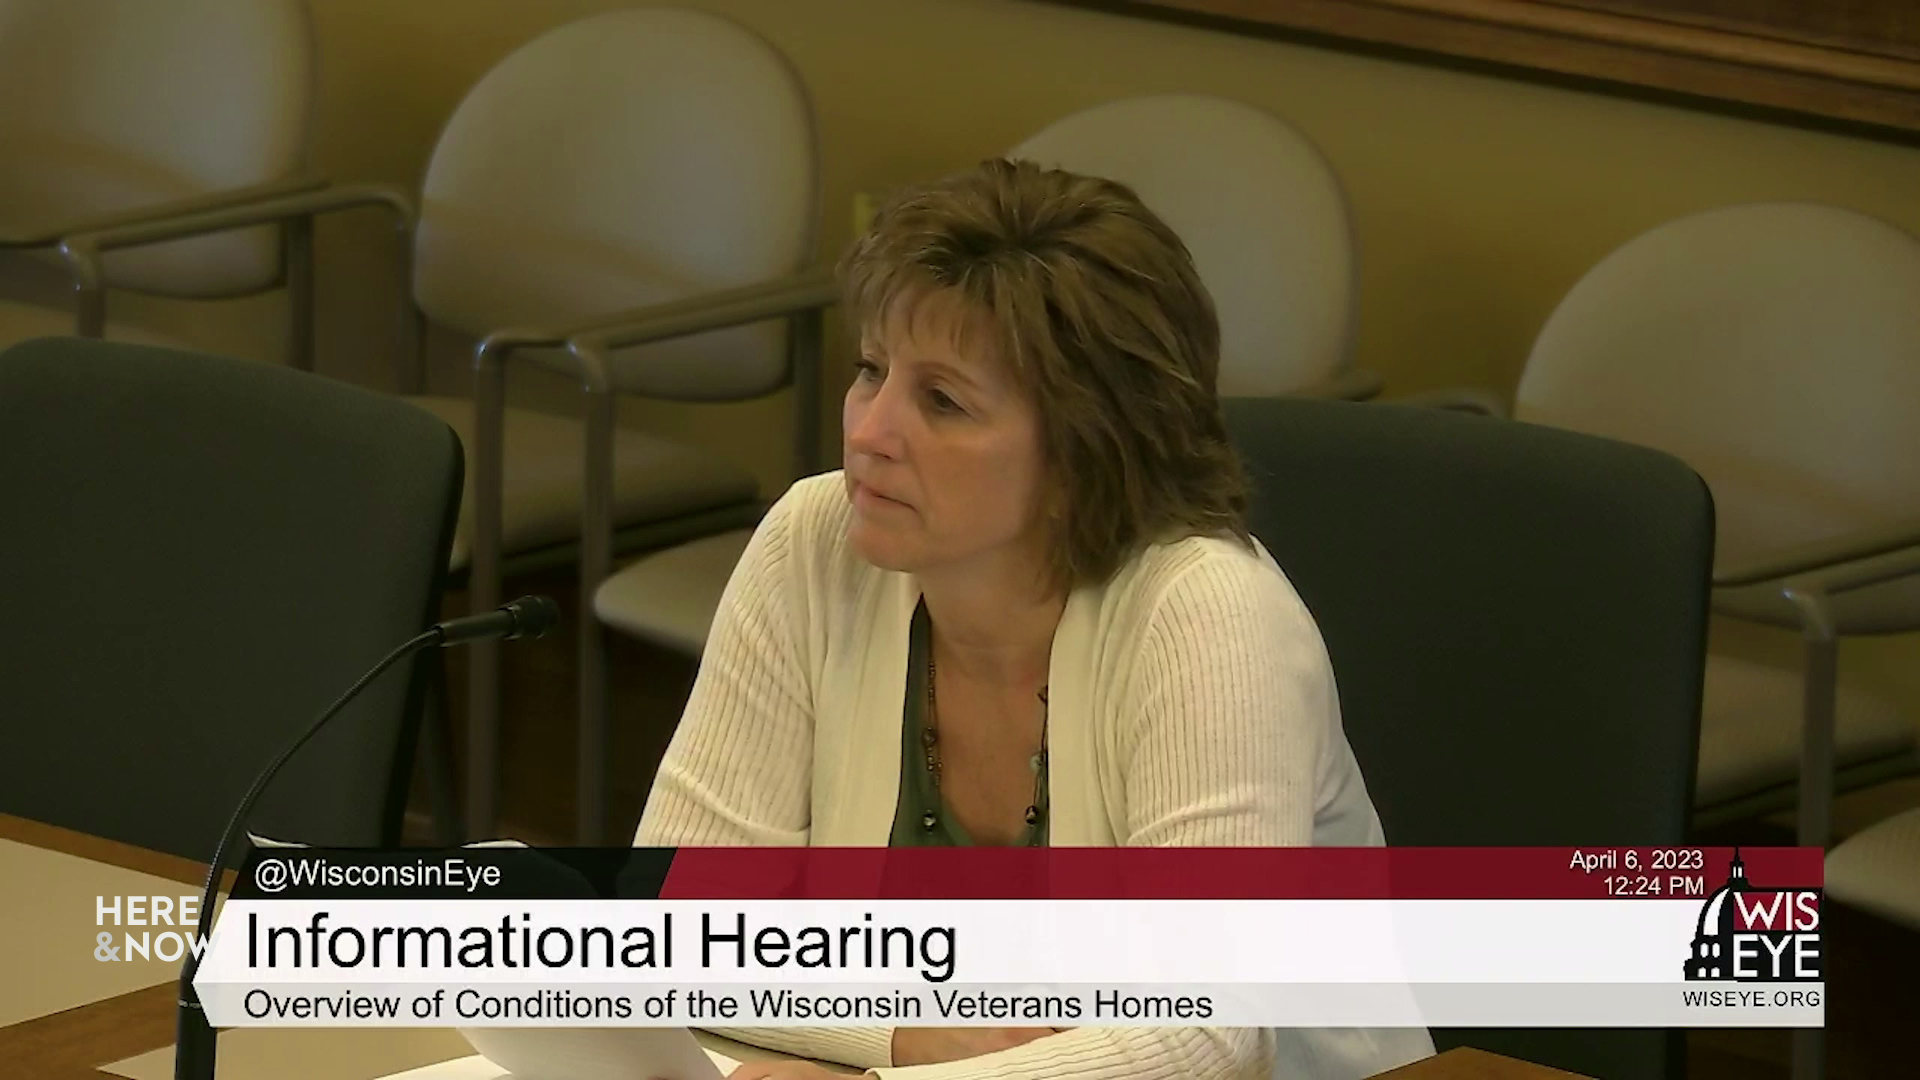 A video still image shows Laurie Miller sitting at a table while speaking into a microphone in a room with multiple empty chairs in the background, with a video graphic at bottom including the text "Informational Hearing" and "Overview of Conditions of the Wisconsin Veterans Homes."